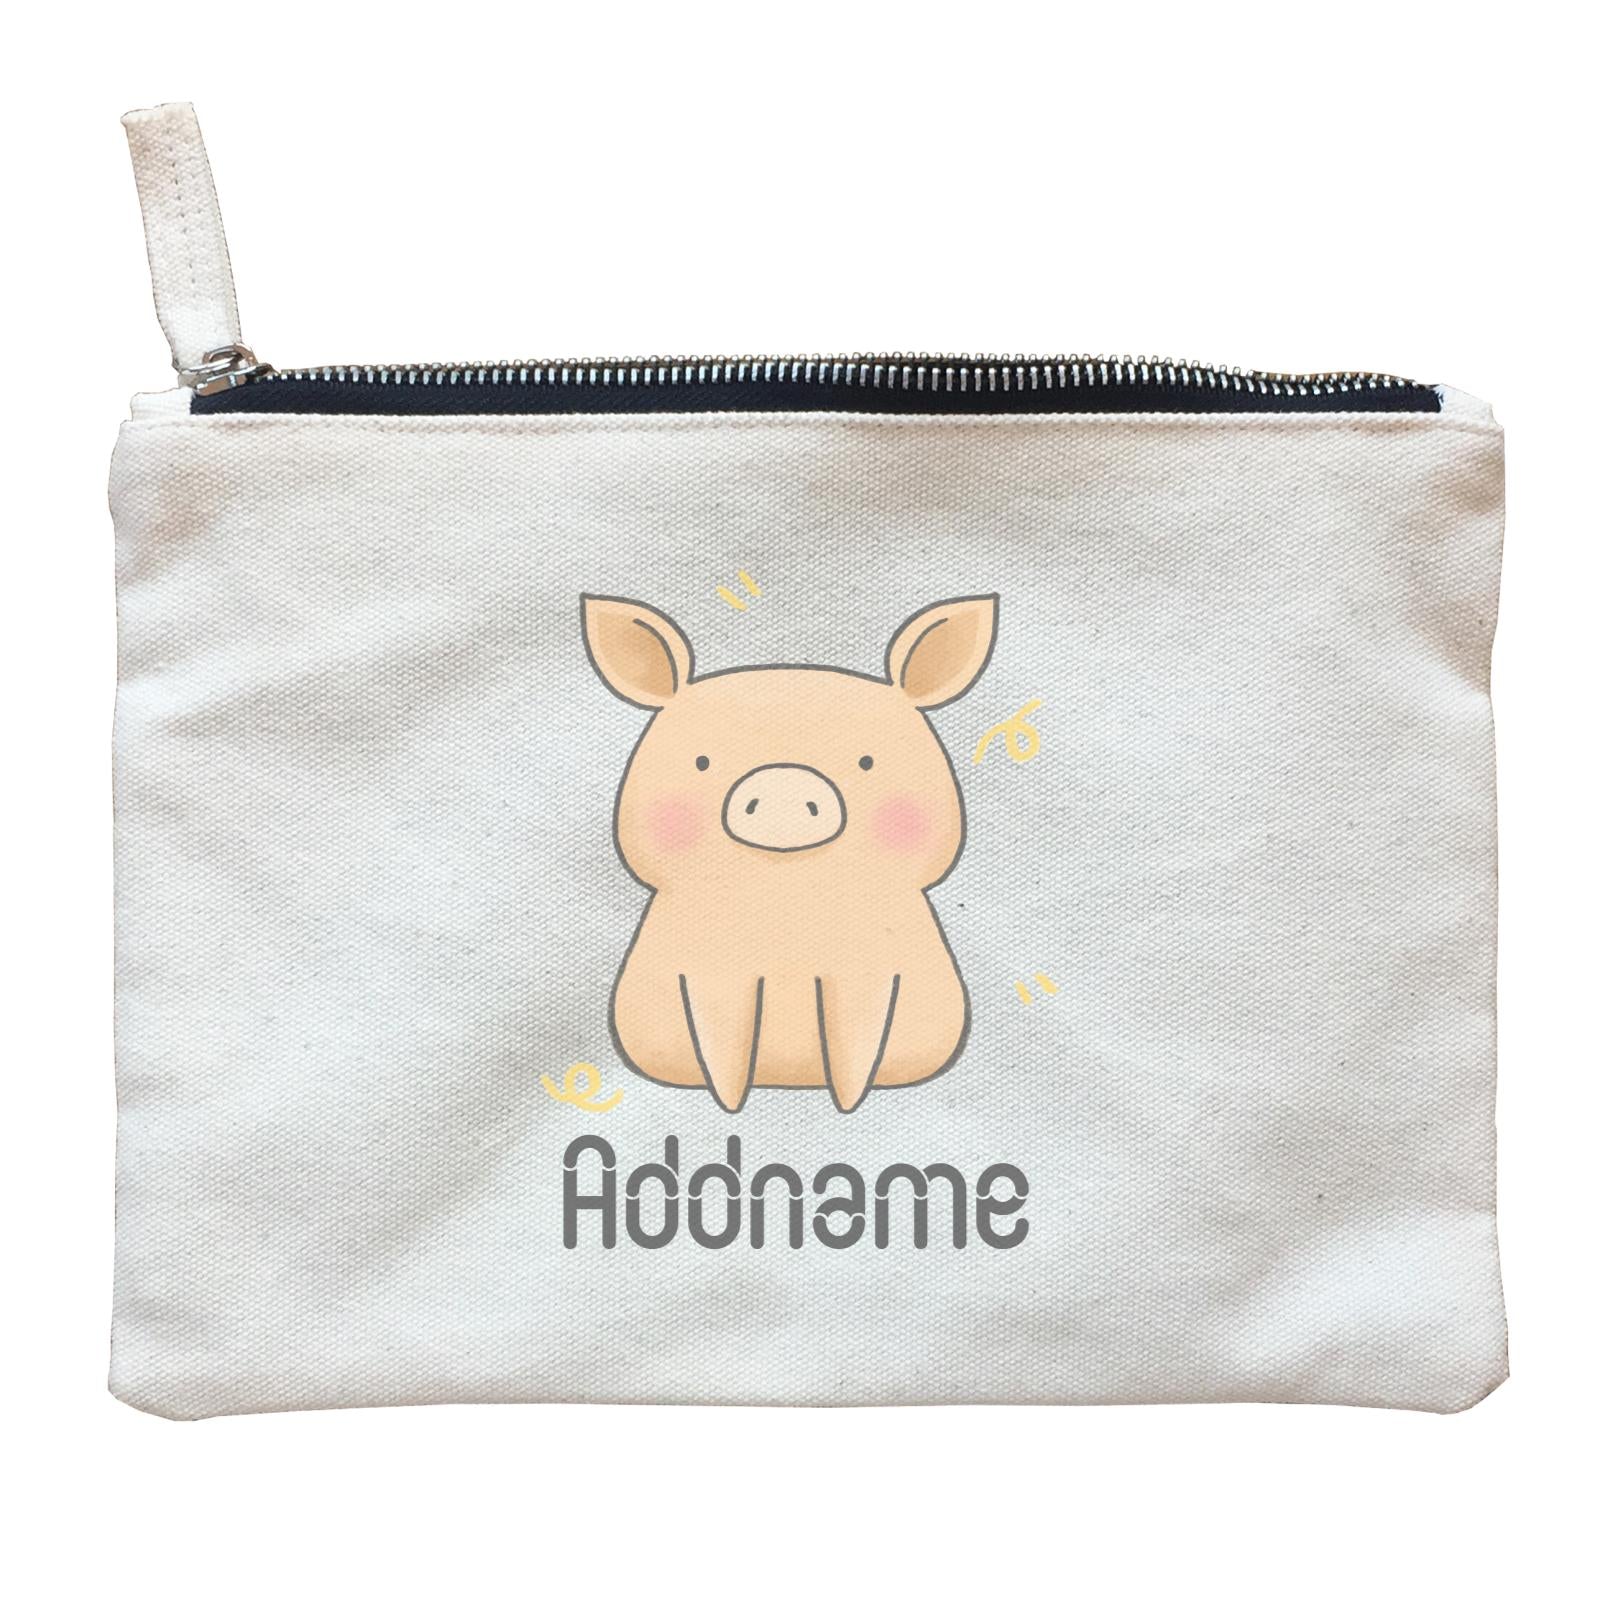 Cute Hand Drawn Style Pig Addname Zipper Pouch